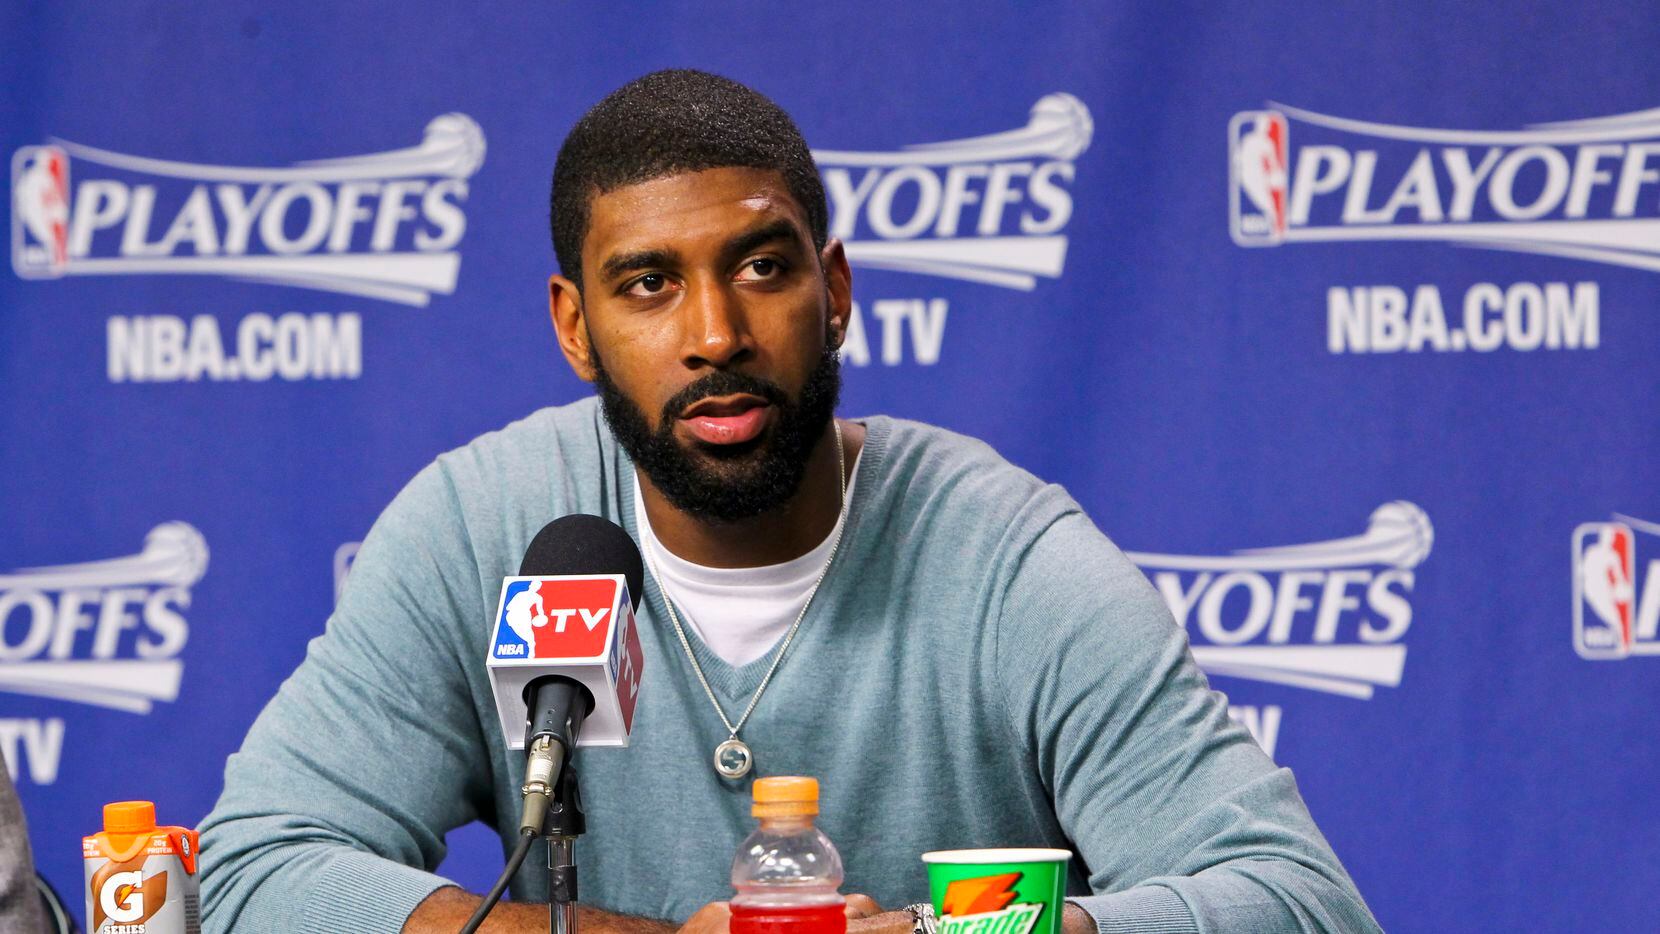 Free agent guard O.J. Mayo to sign two-year deal with Mavericks